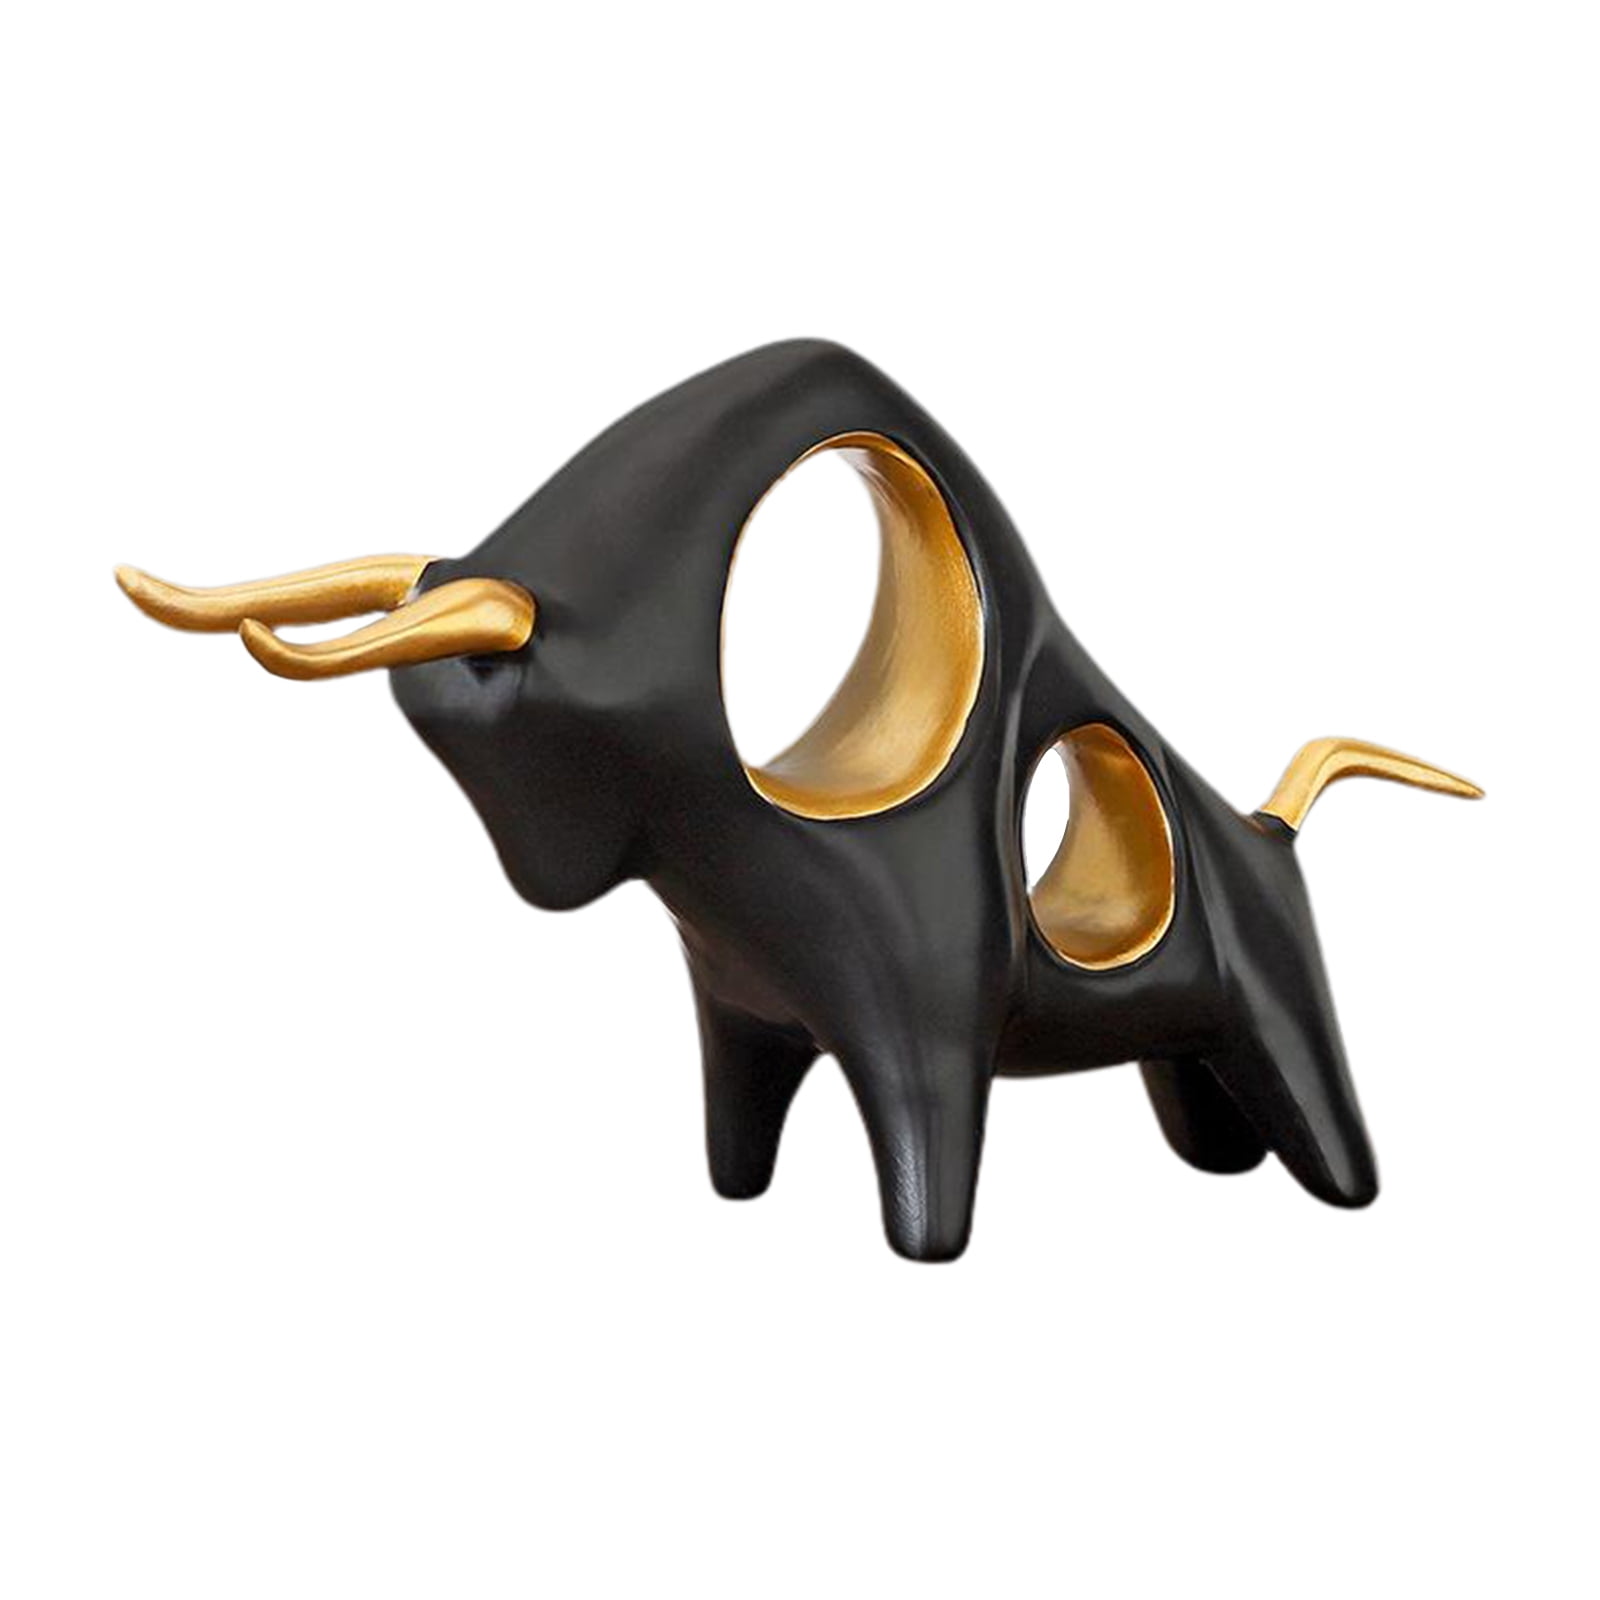 Table and Desktop Office Baoblaze Resin Sculpture Accent Piece B Black Modern Ox Bull Shaped Decorative Object for Home